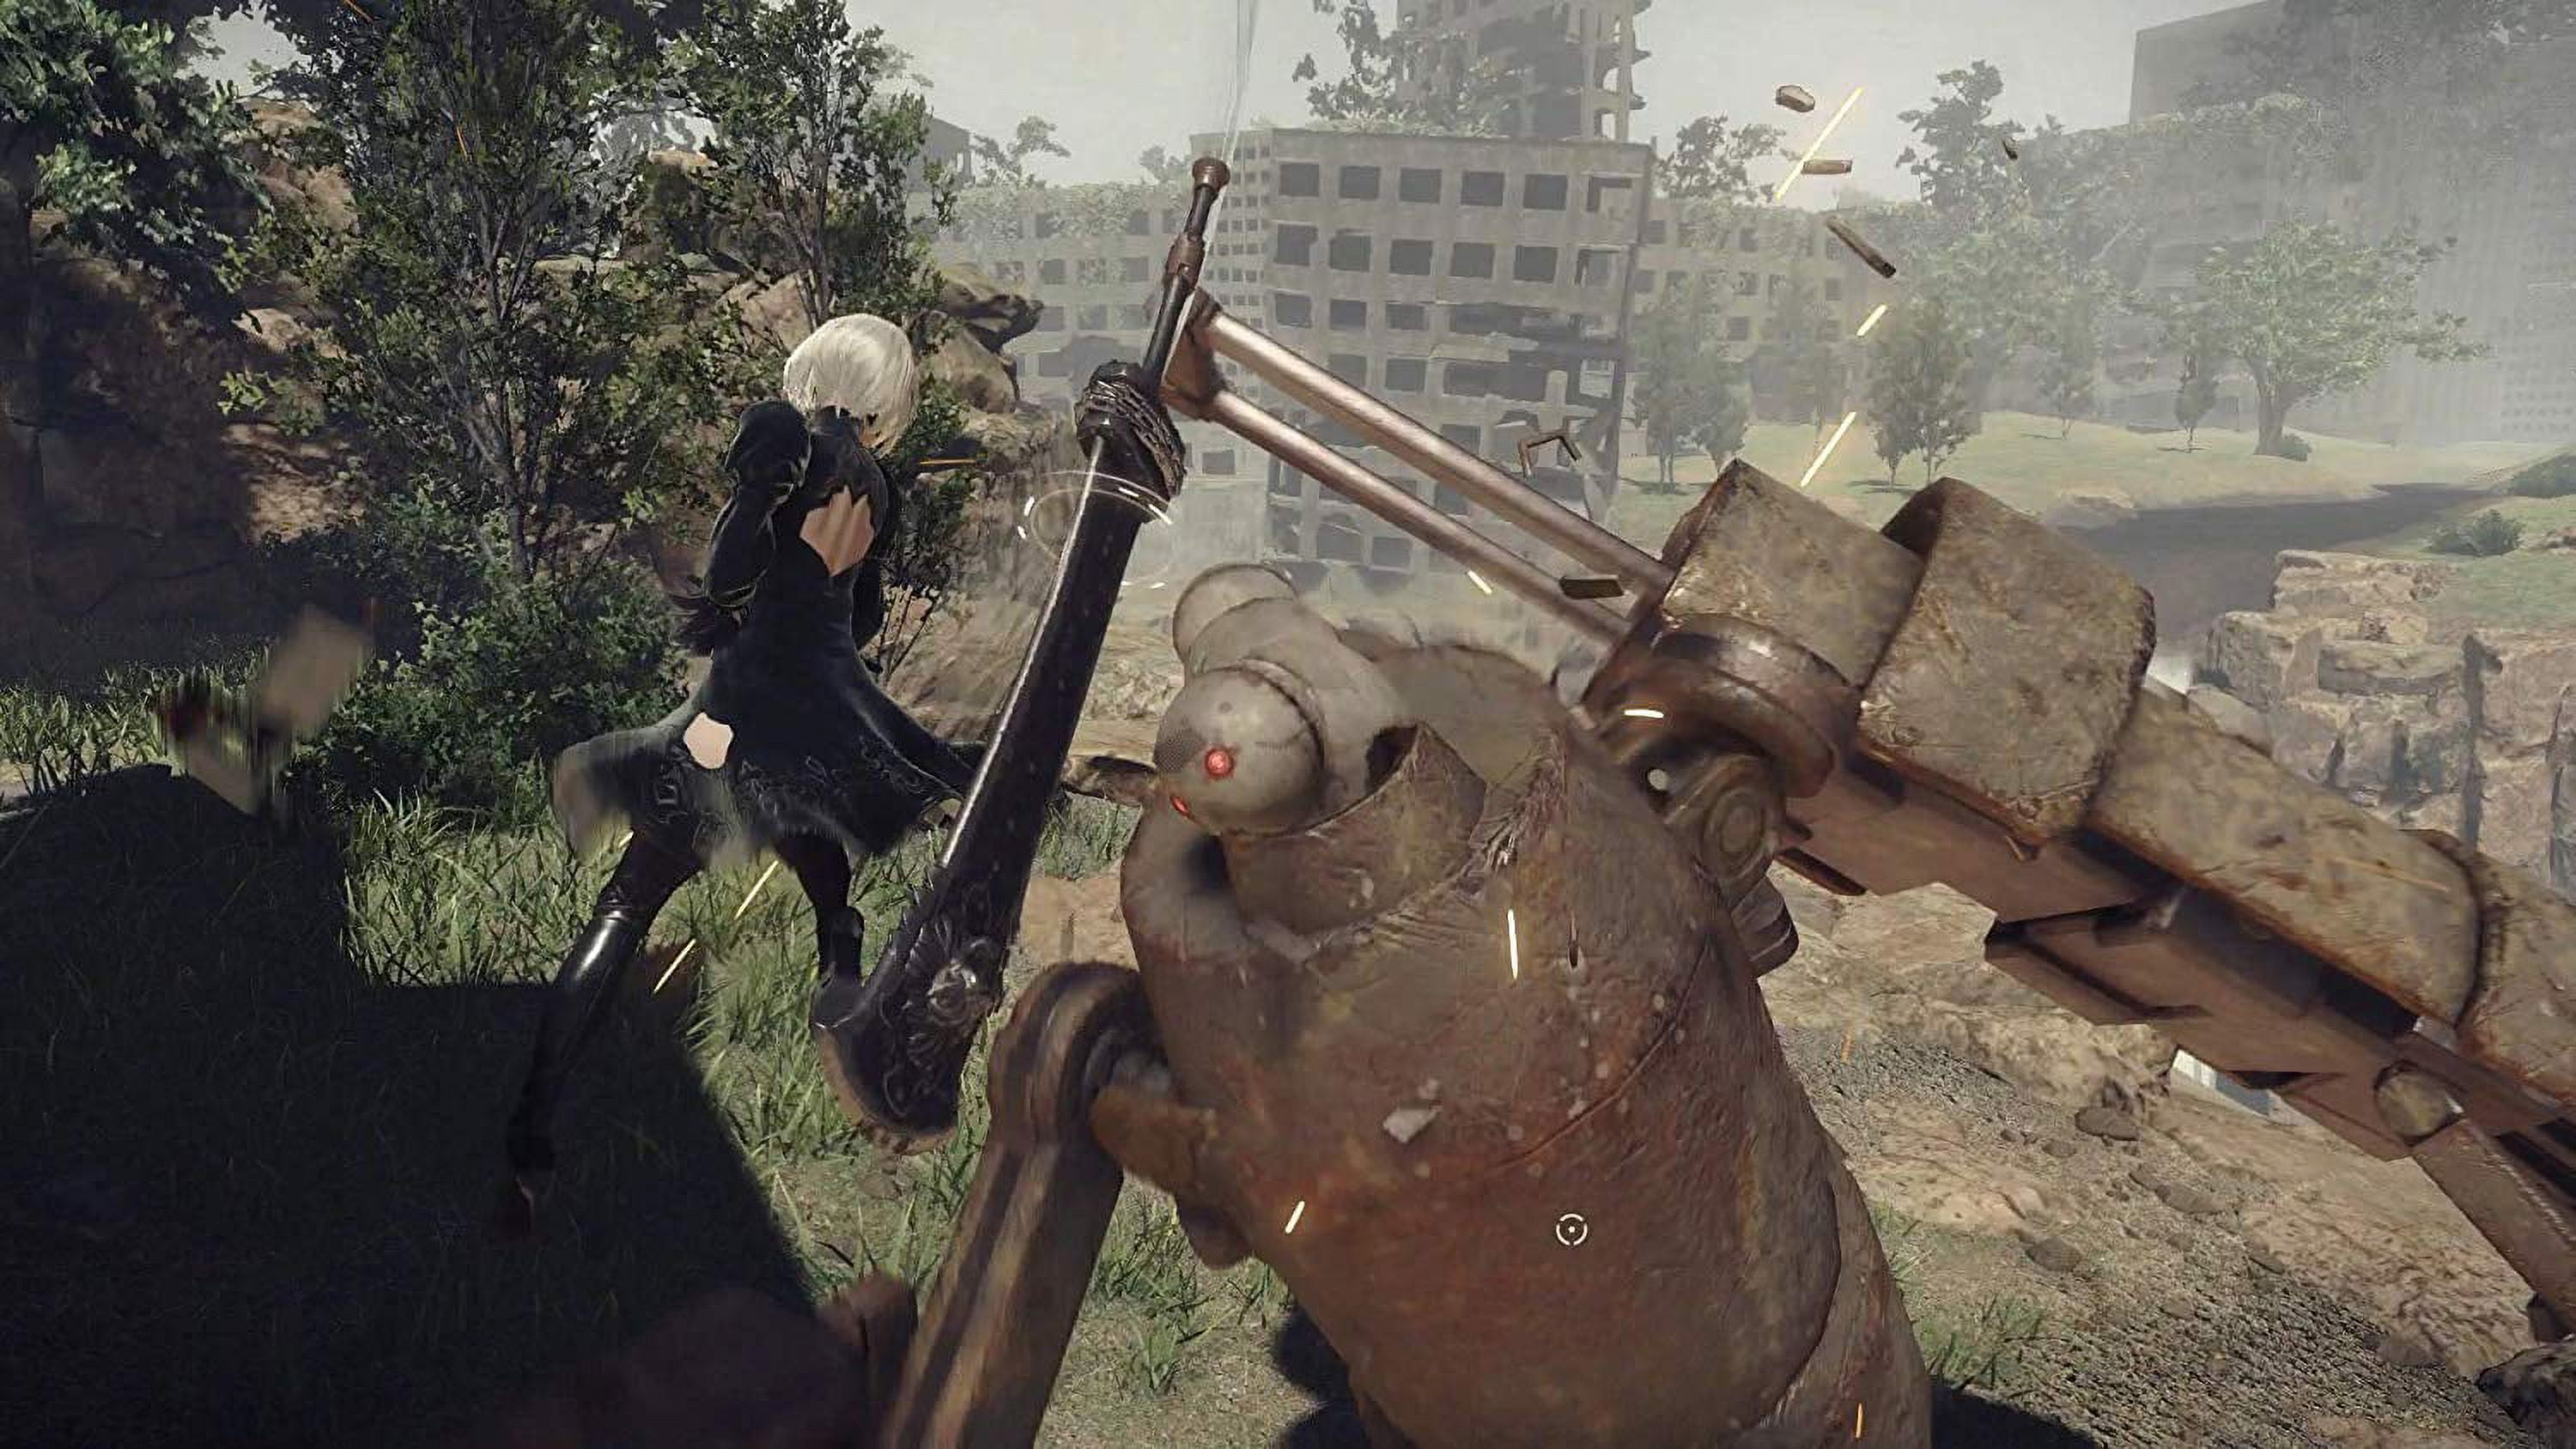 Game of the yorha edition. NIER: Automata (ps4). NIER Automata PLAYSTATION 4. NIER Automata на пс4. NIER Automata yorha Edition ps4.